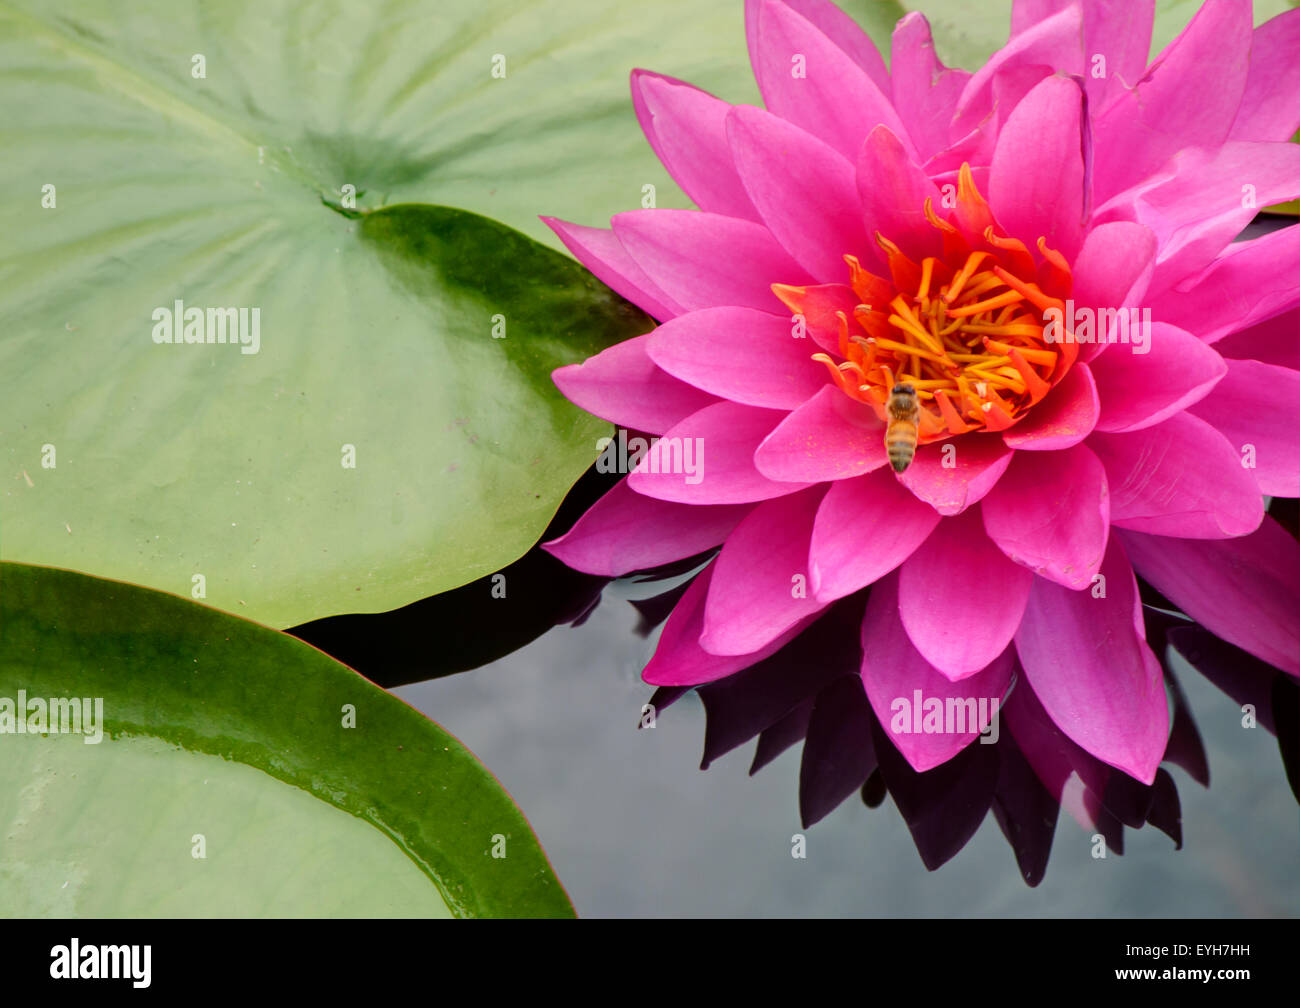 Lotus flower on the water. Stock Photo